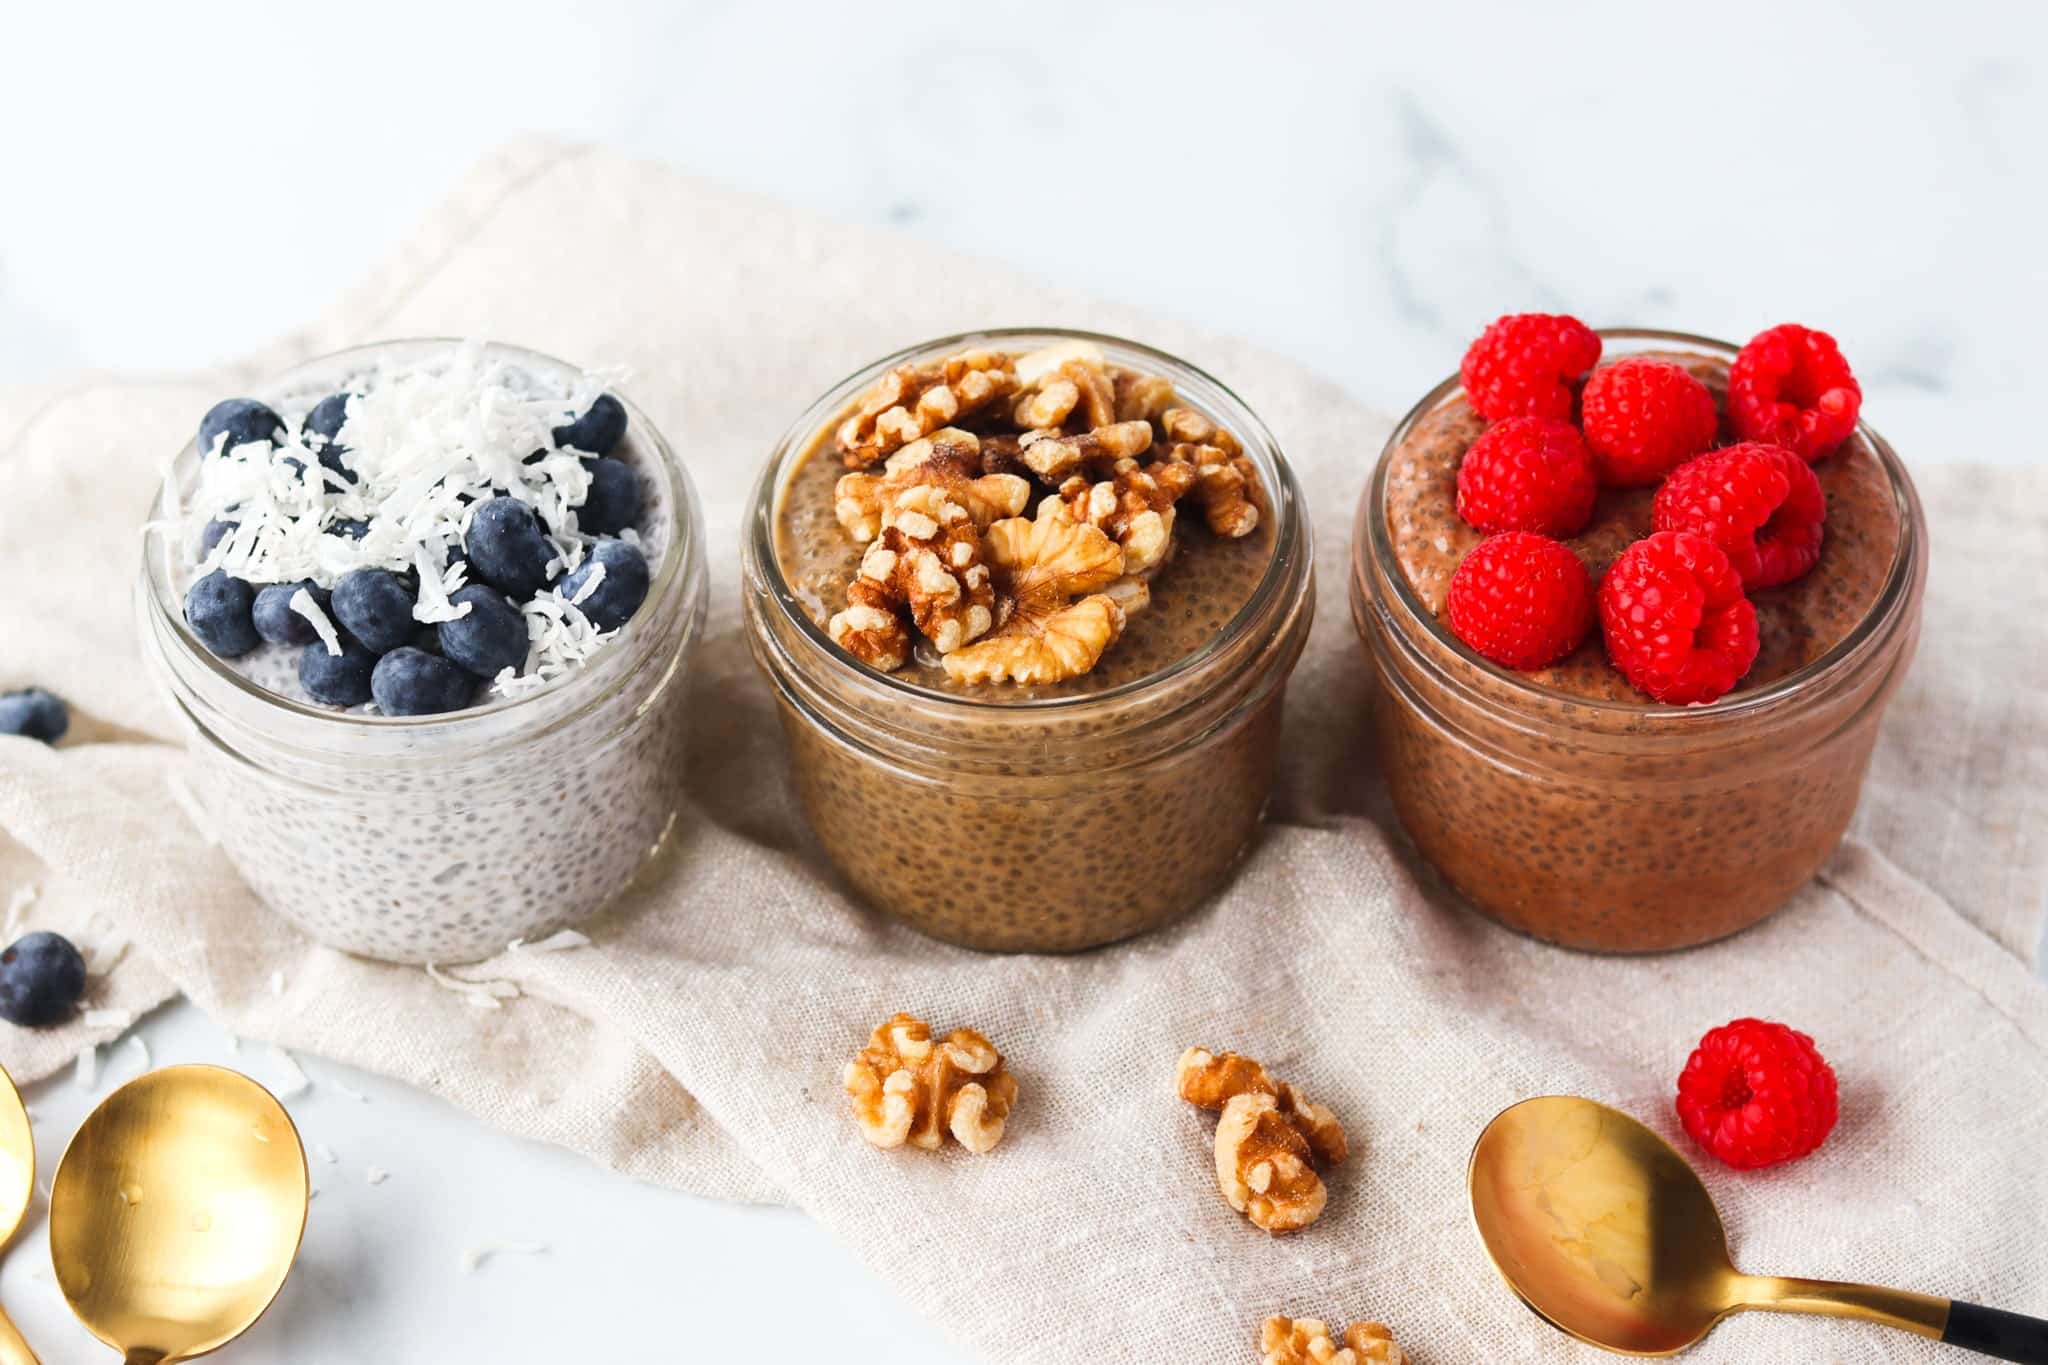 https://www.foodnutra.com/wp-content/uploads/2023/11/how-to-make-chia-seed-pudding.jpg